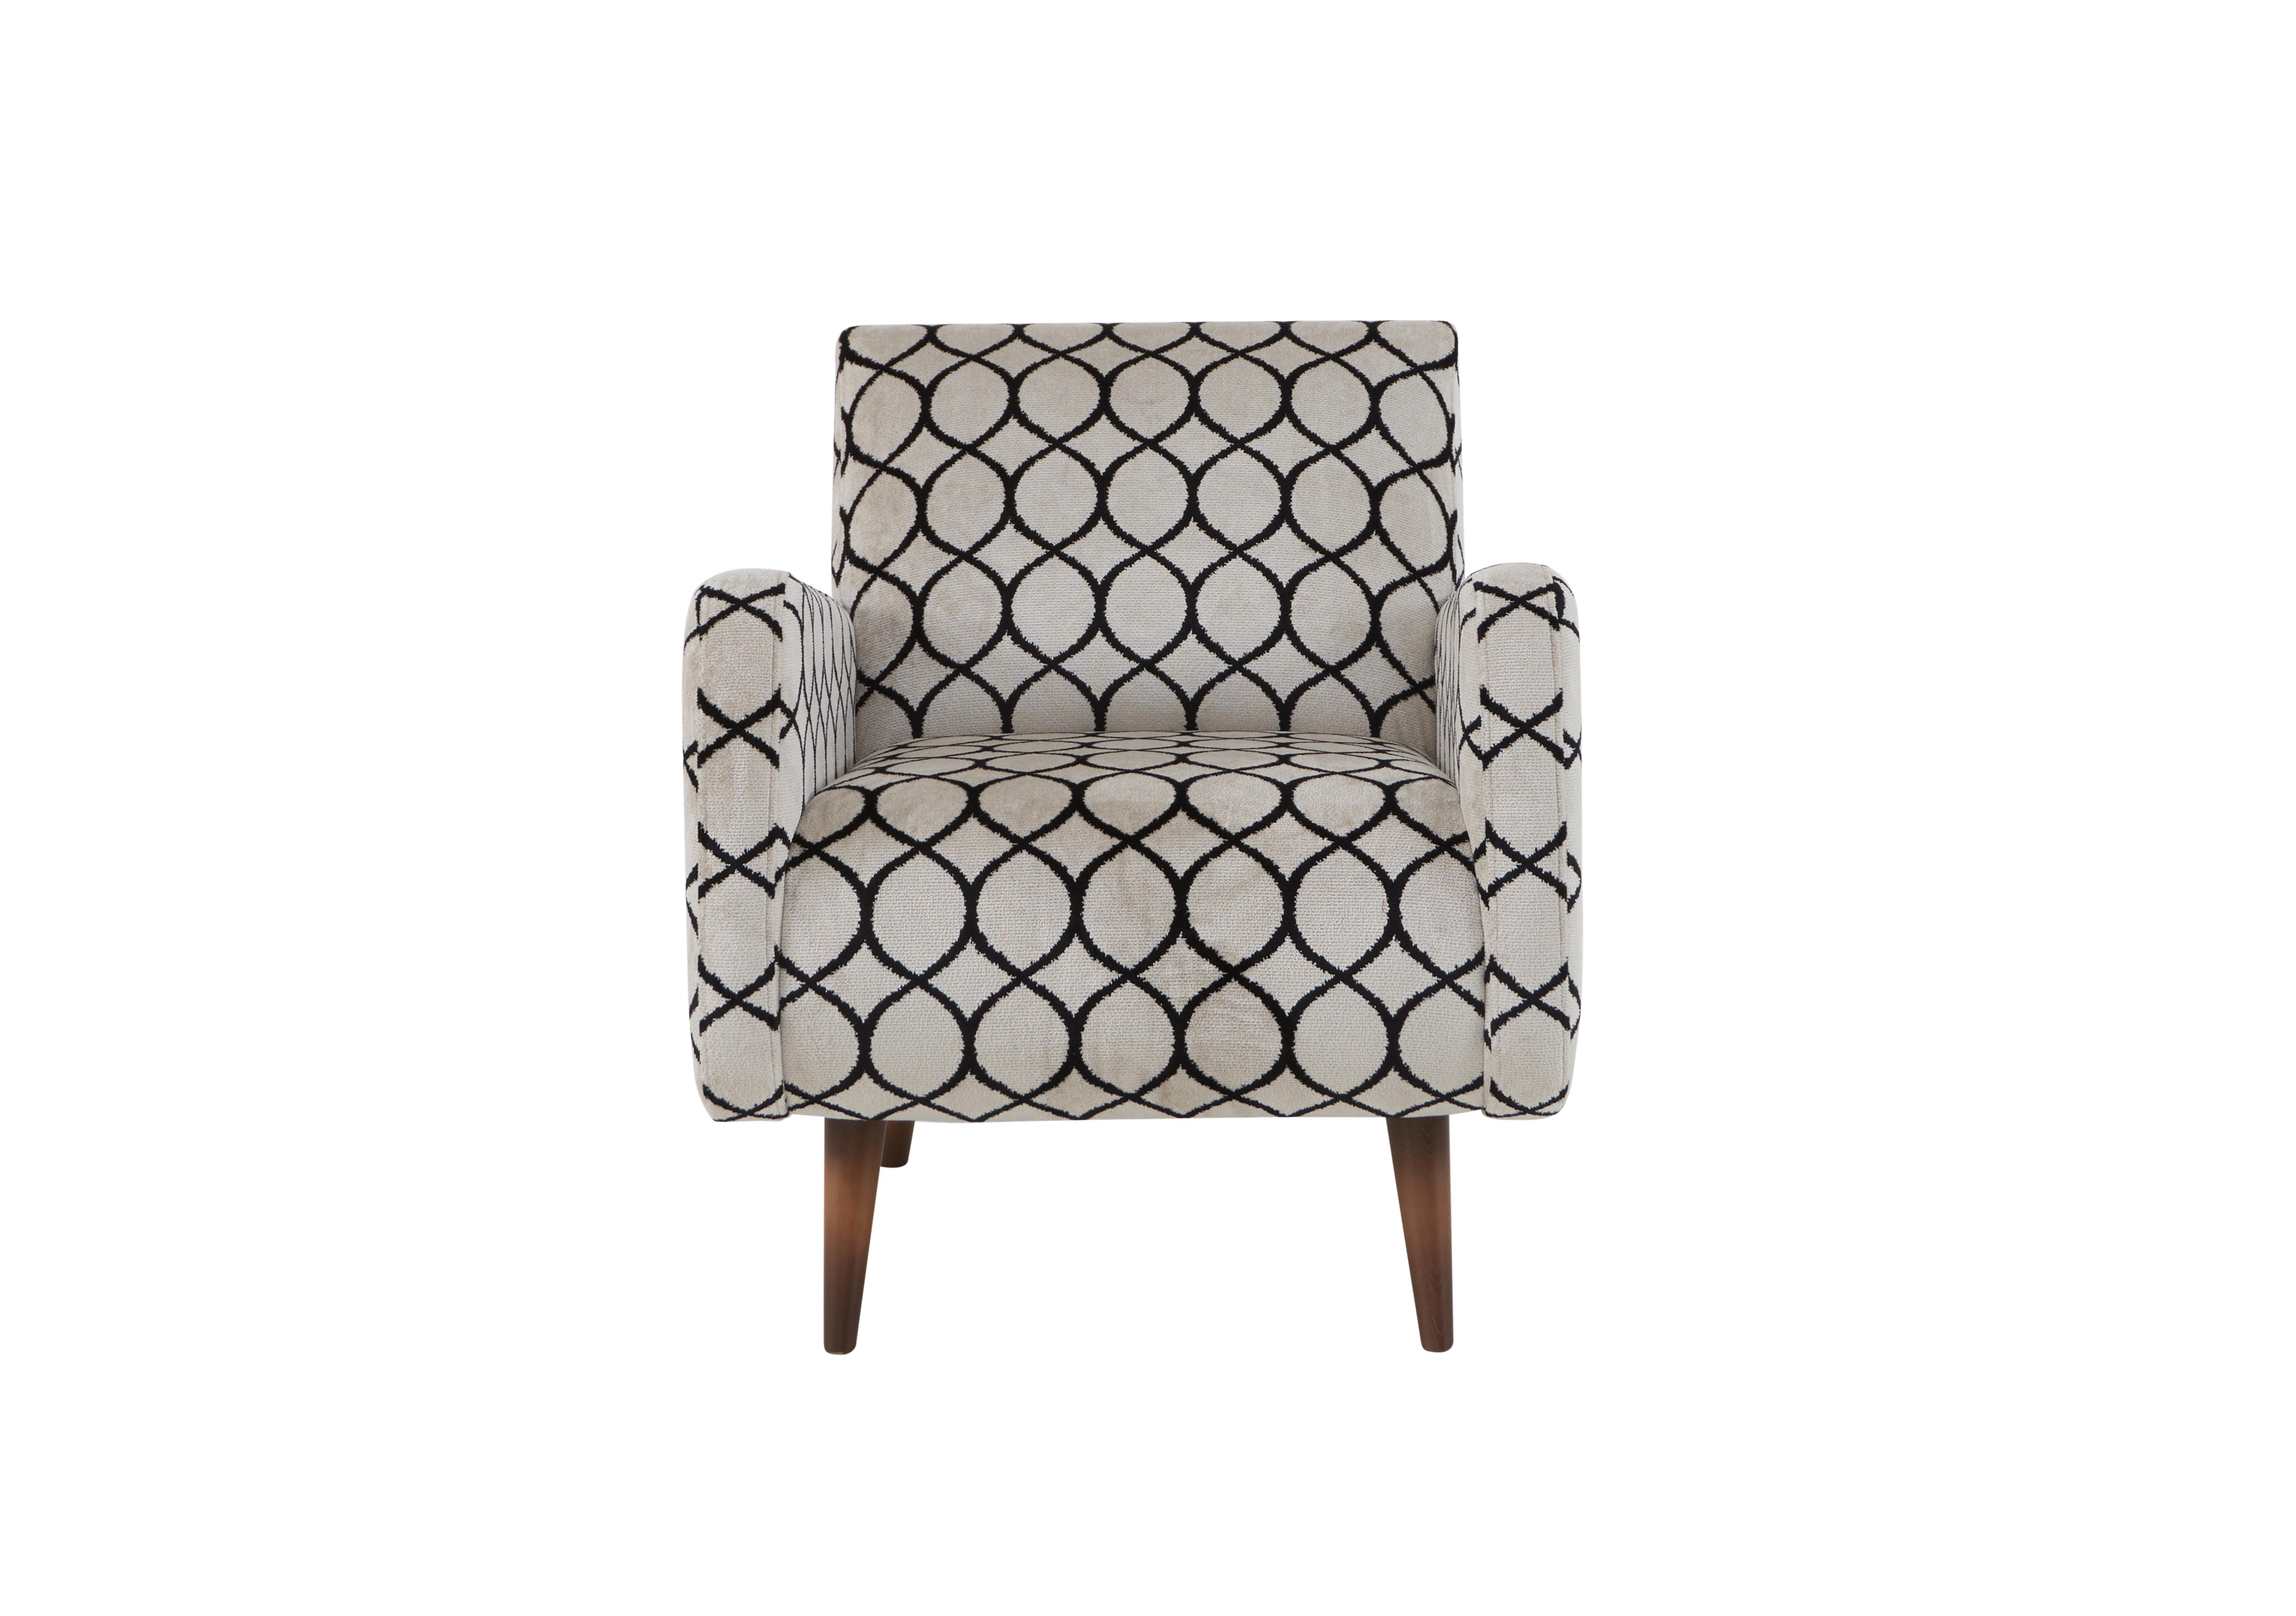 Sumptuous Fabric Accent Chair in Canto Natural Dk on Furniture Village